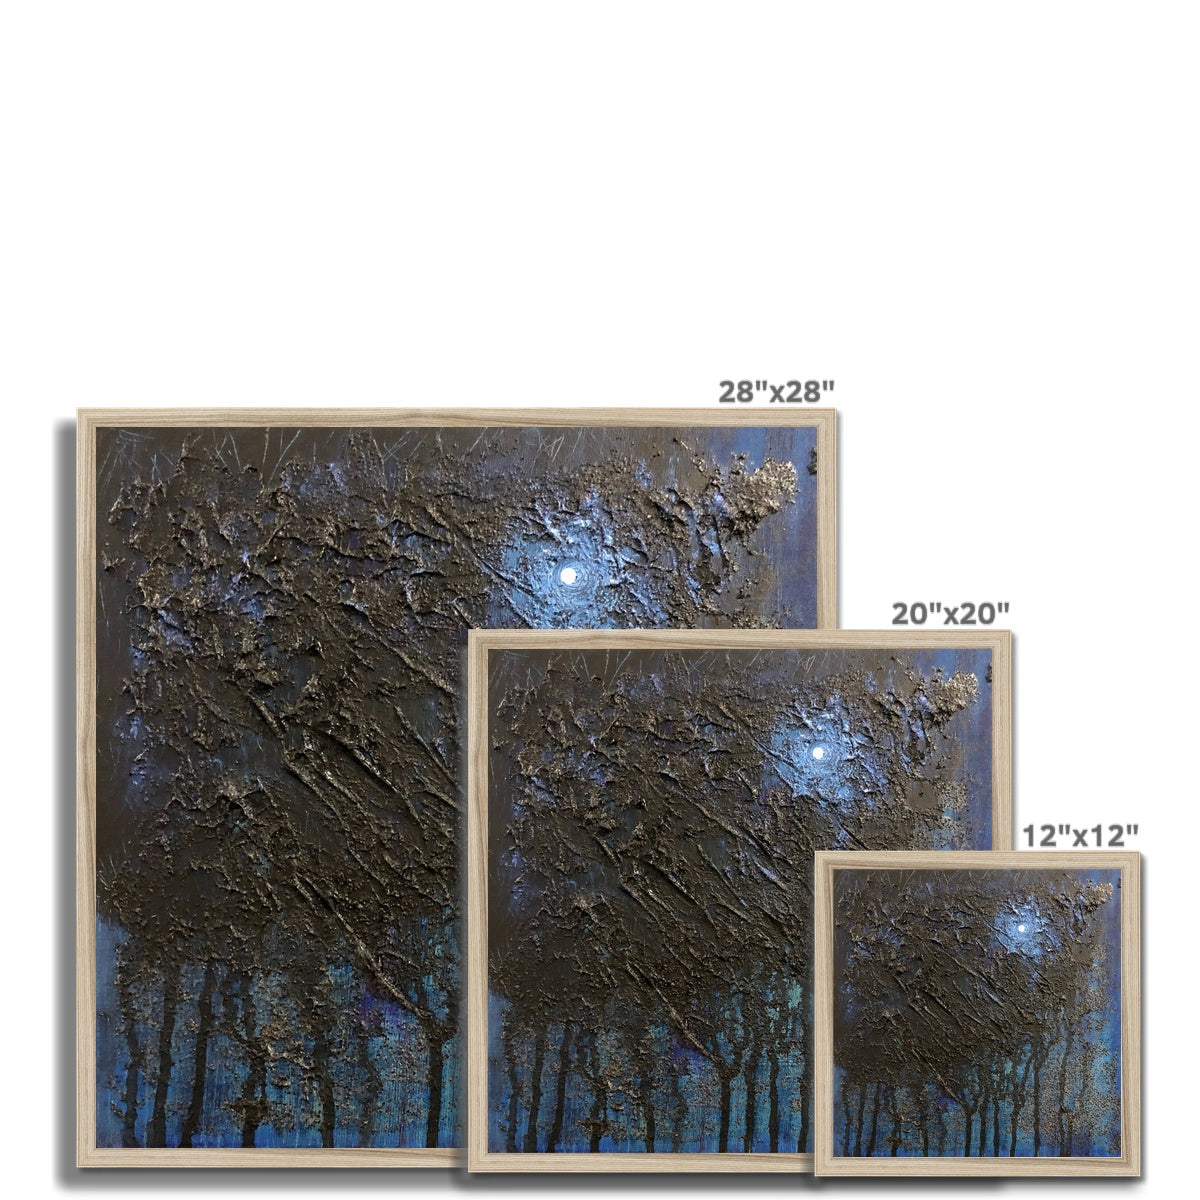 The Blue Moon Wood Abstract Painting | Framed Prints From Scotland-Framed Prints-Abstract & Impressionistic Art Gallery-Paintings, Prints, Homeware, Art Gifts From Scotland By Scottish Artist Kevin Hunter